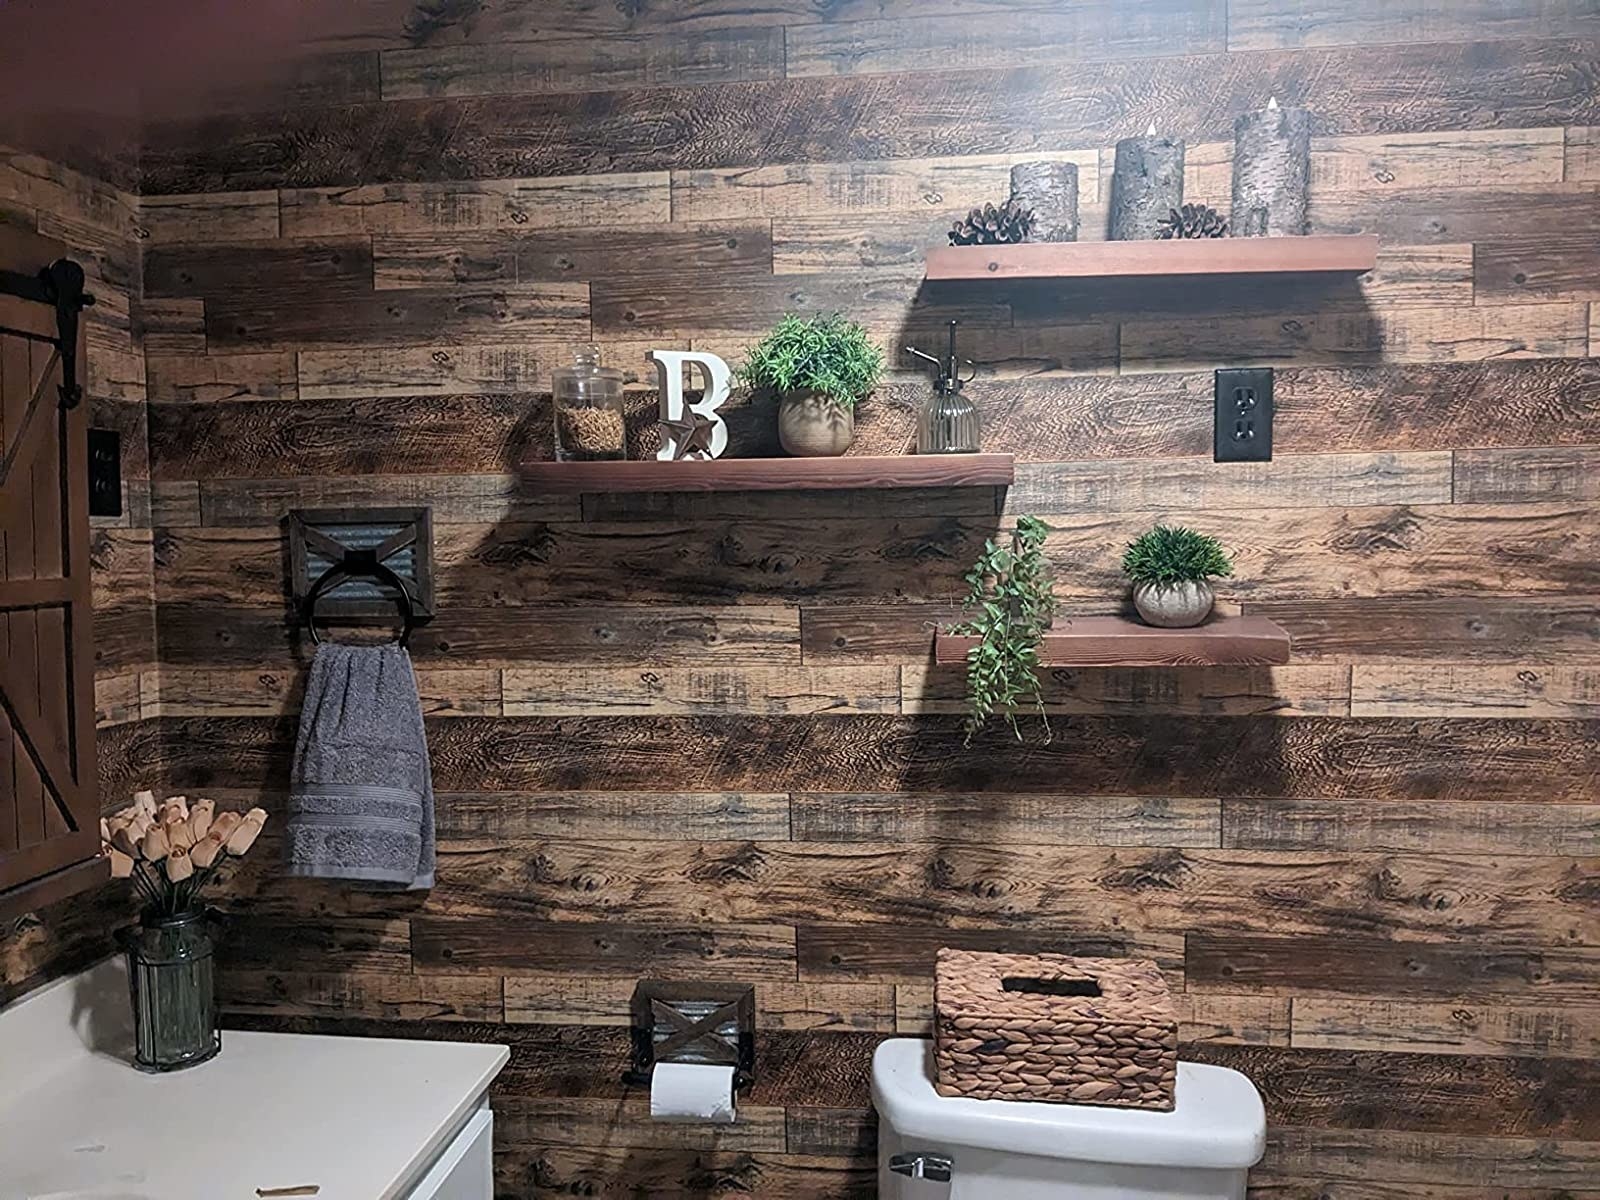 Reviewer image of the wallpaper installed in their bathroom